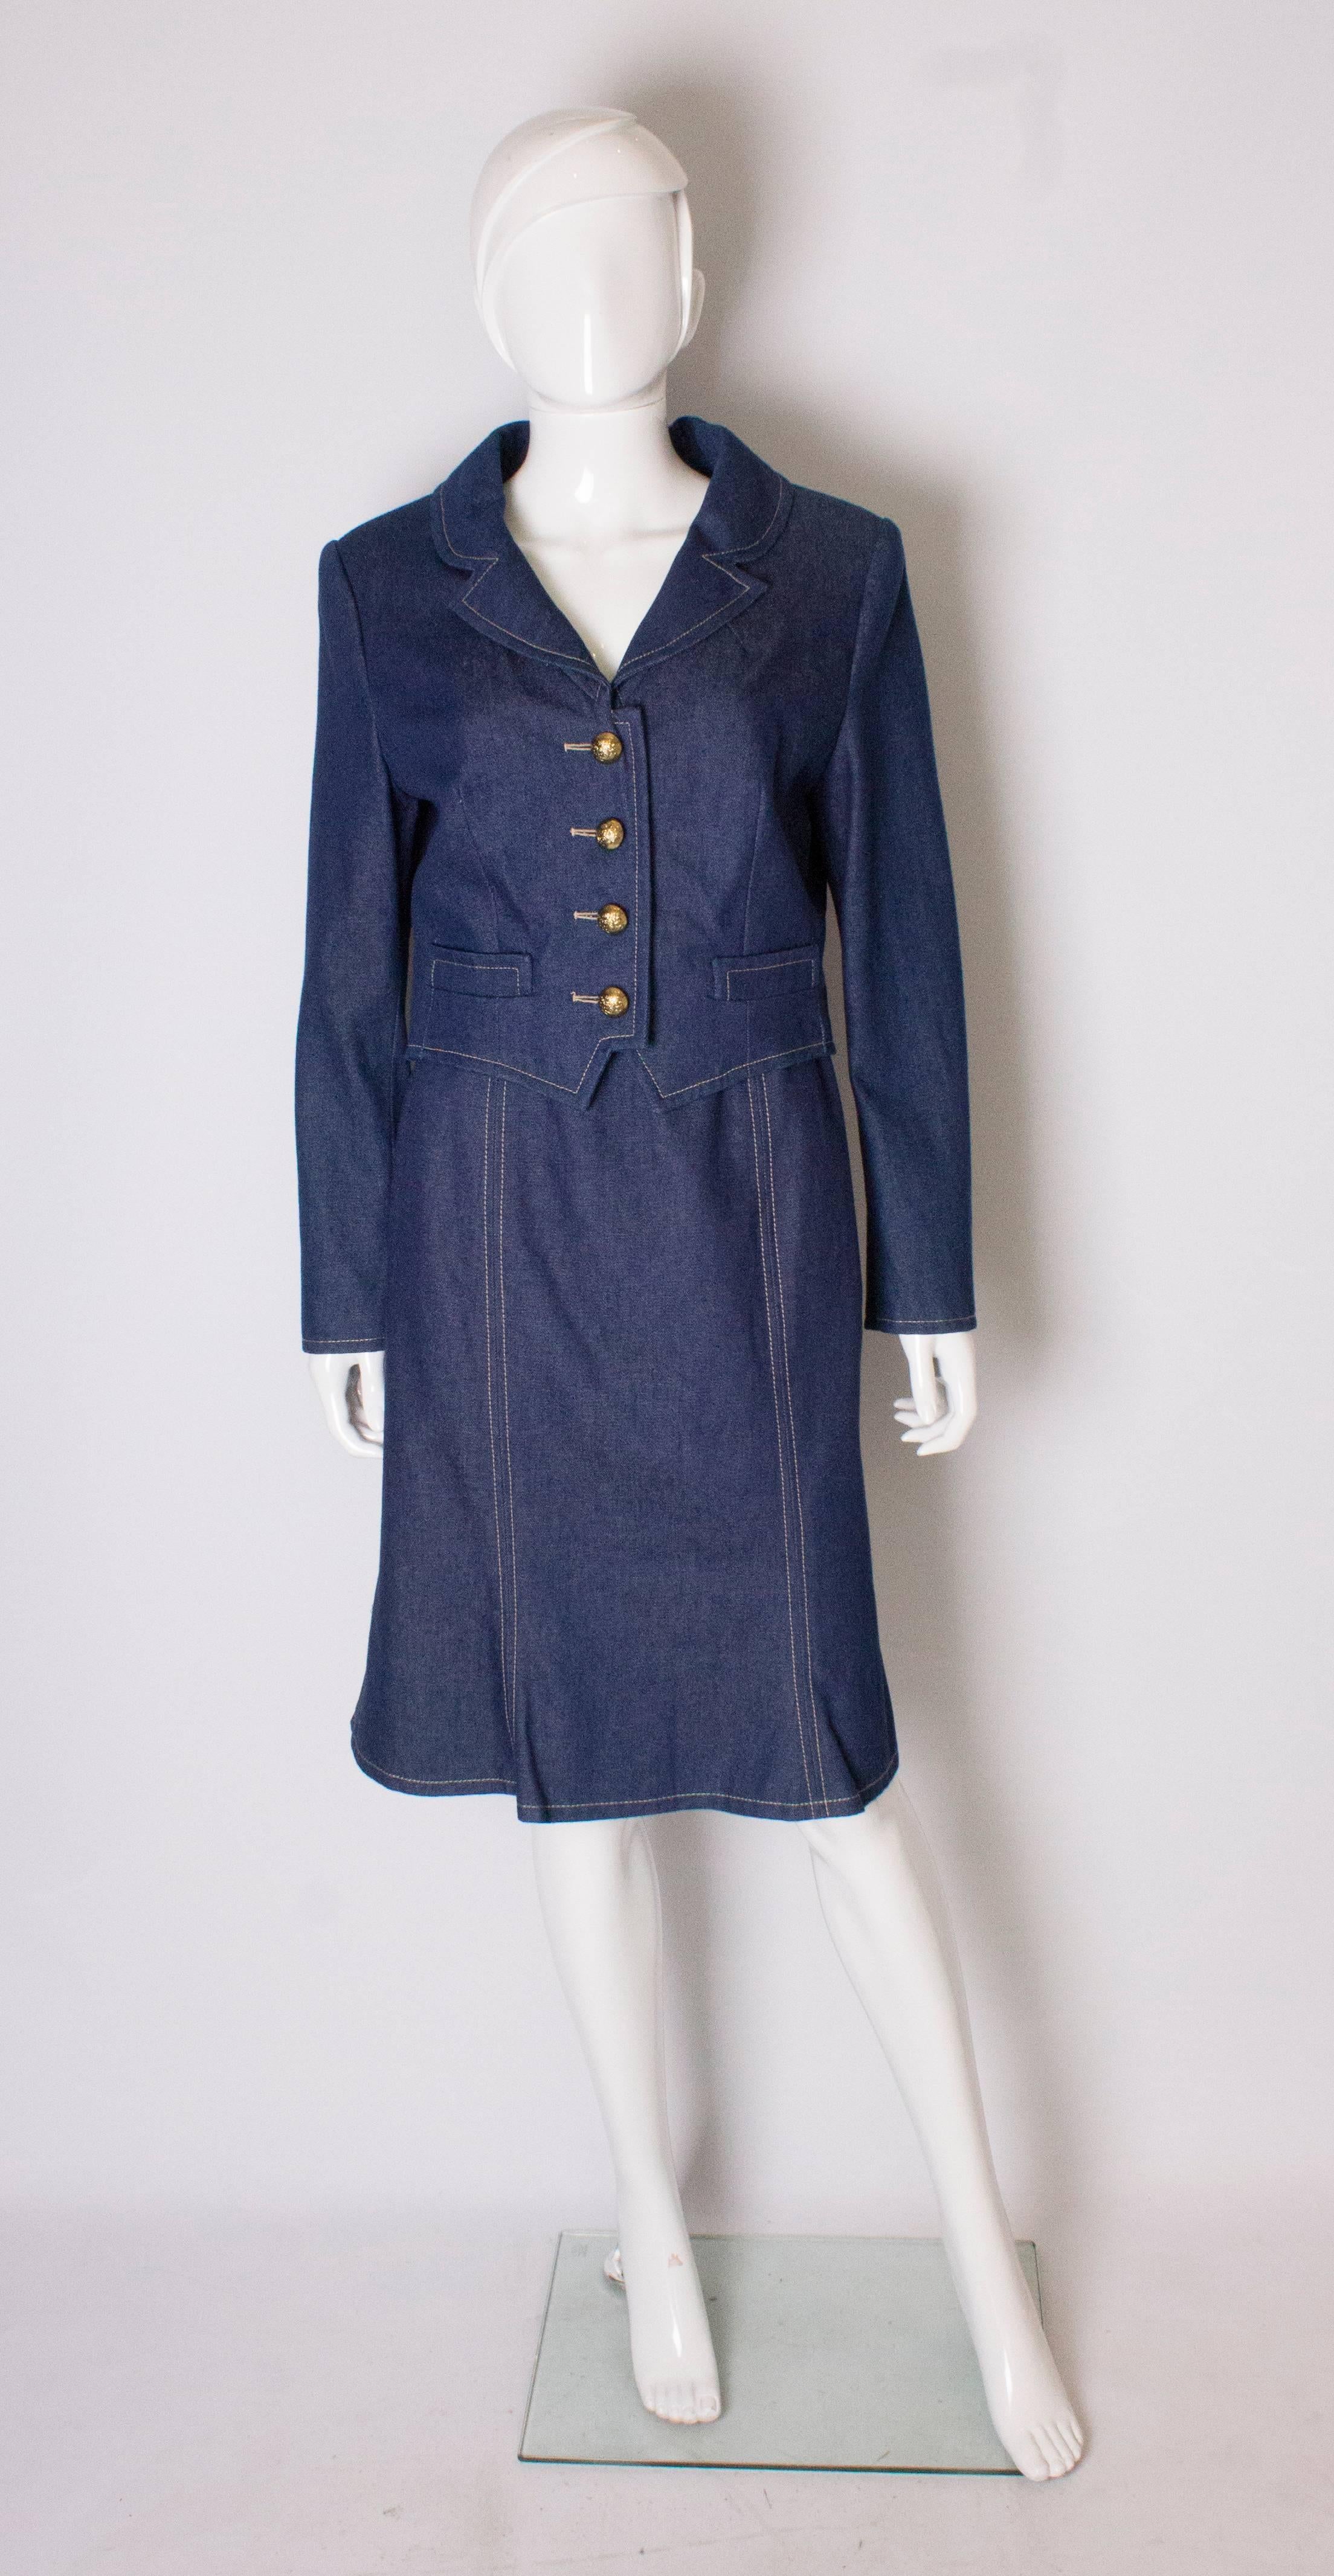 A chic skirt suit by british designer Donald Campbell.  In a blue denim fabric, the jacket has a v neck with a 4 button opening , and 3 buttons on each cuff, and is fully lined. The skirt has a central back zip and is fully lined. Measurements